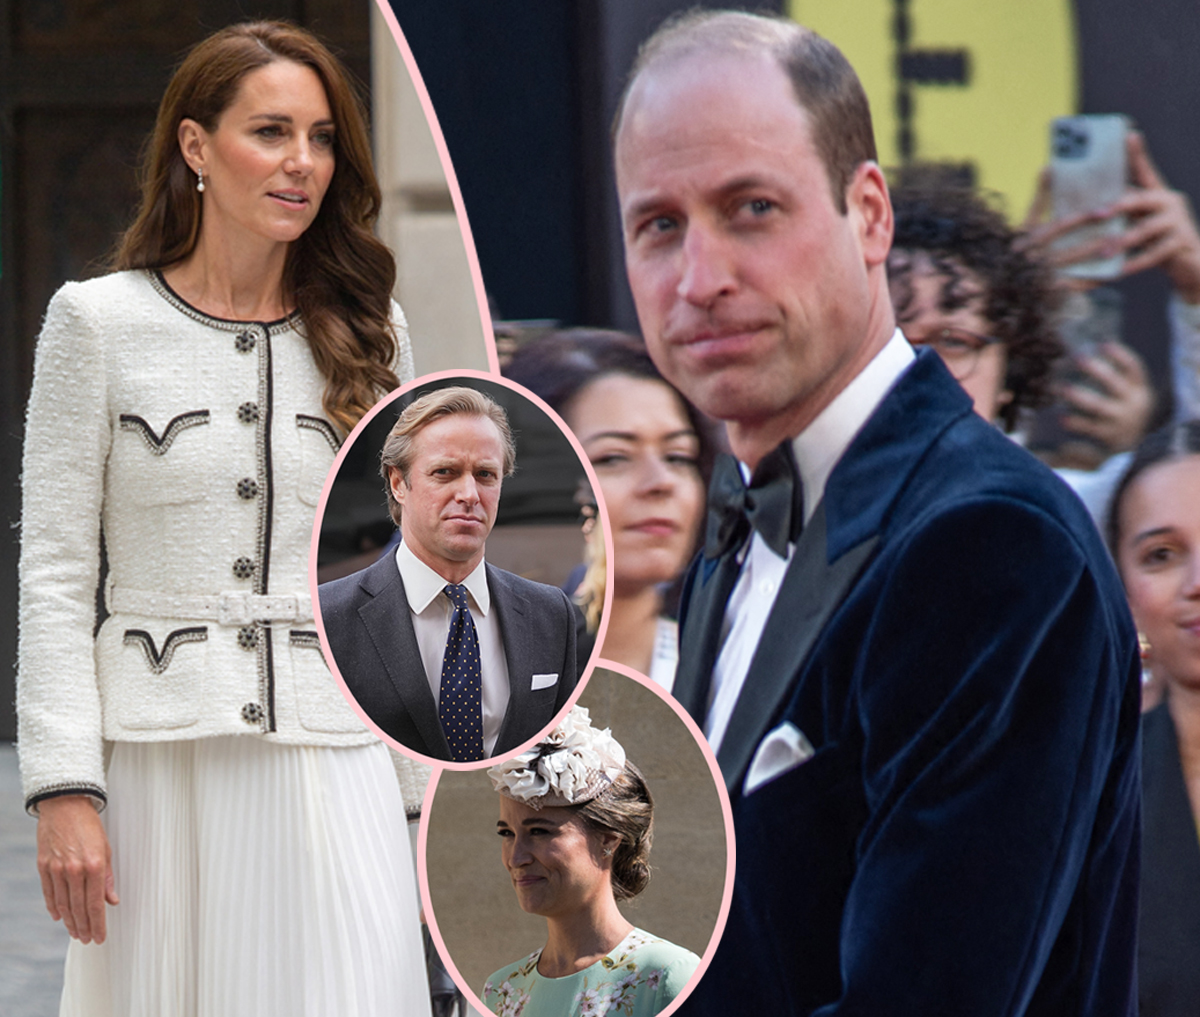 #Prince William Attends Funeral For Pippa Middleton’s Ex — Without Princess Catherine!